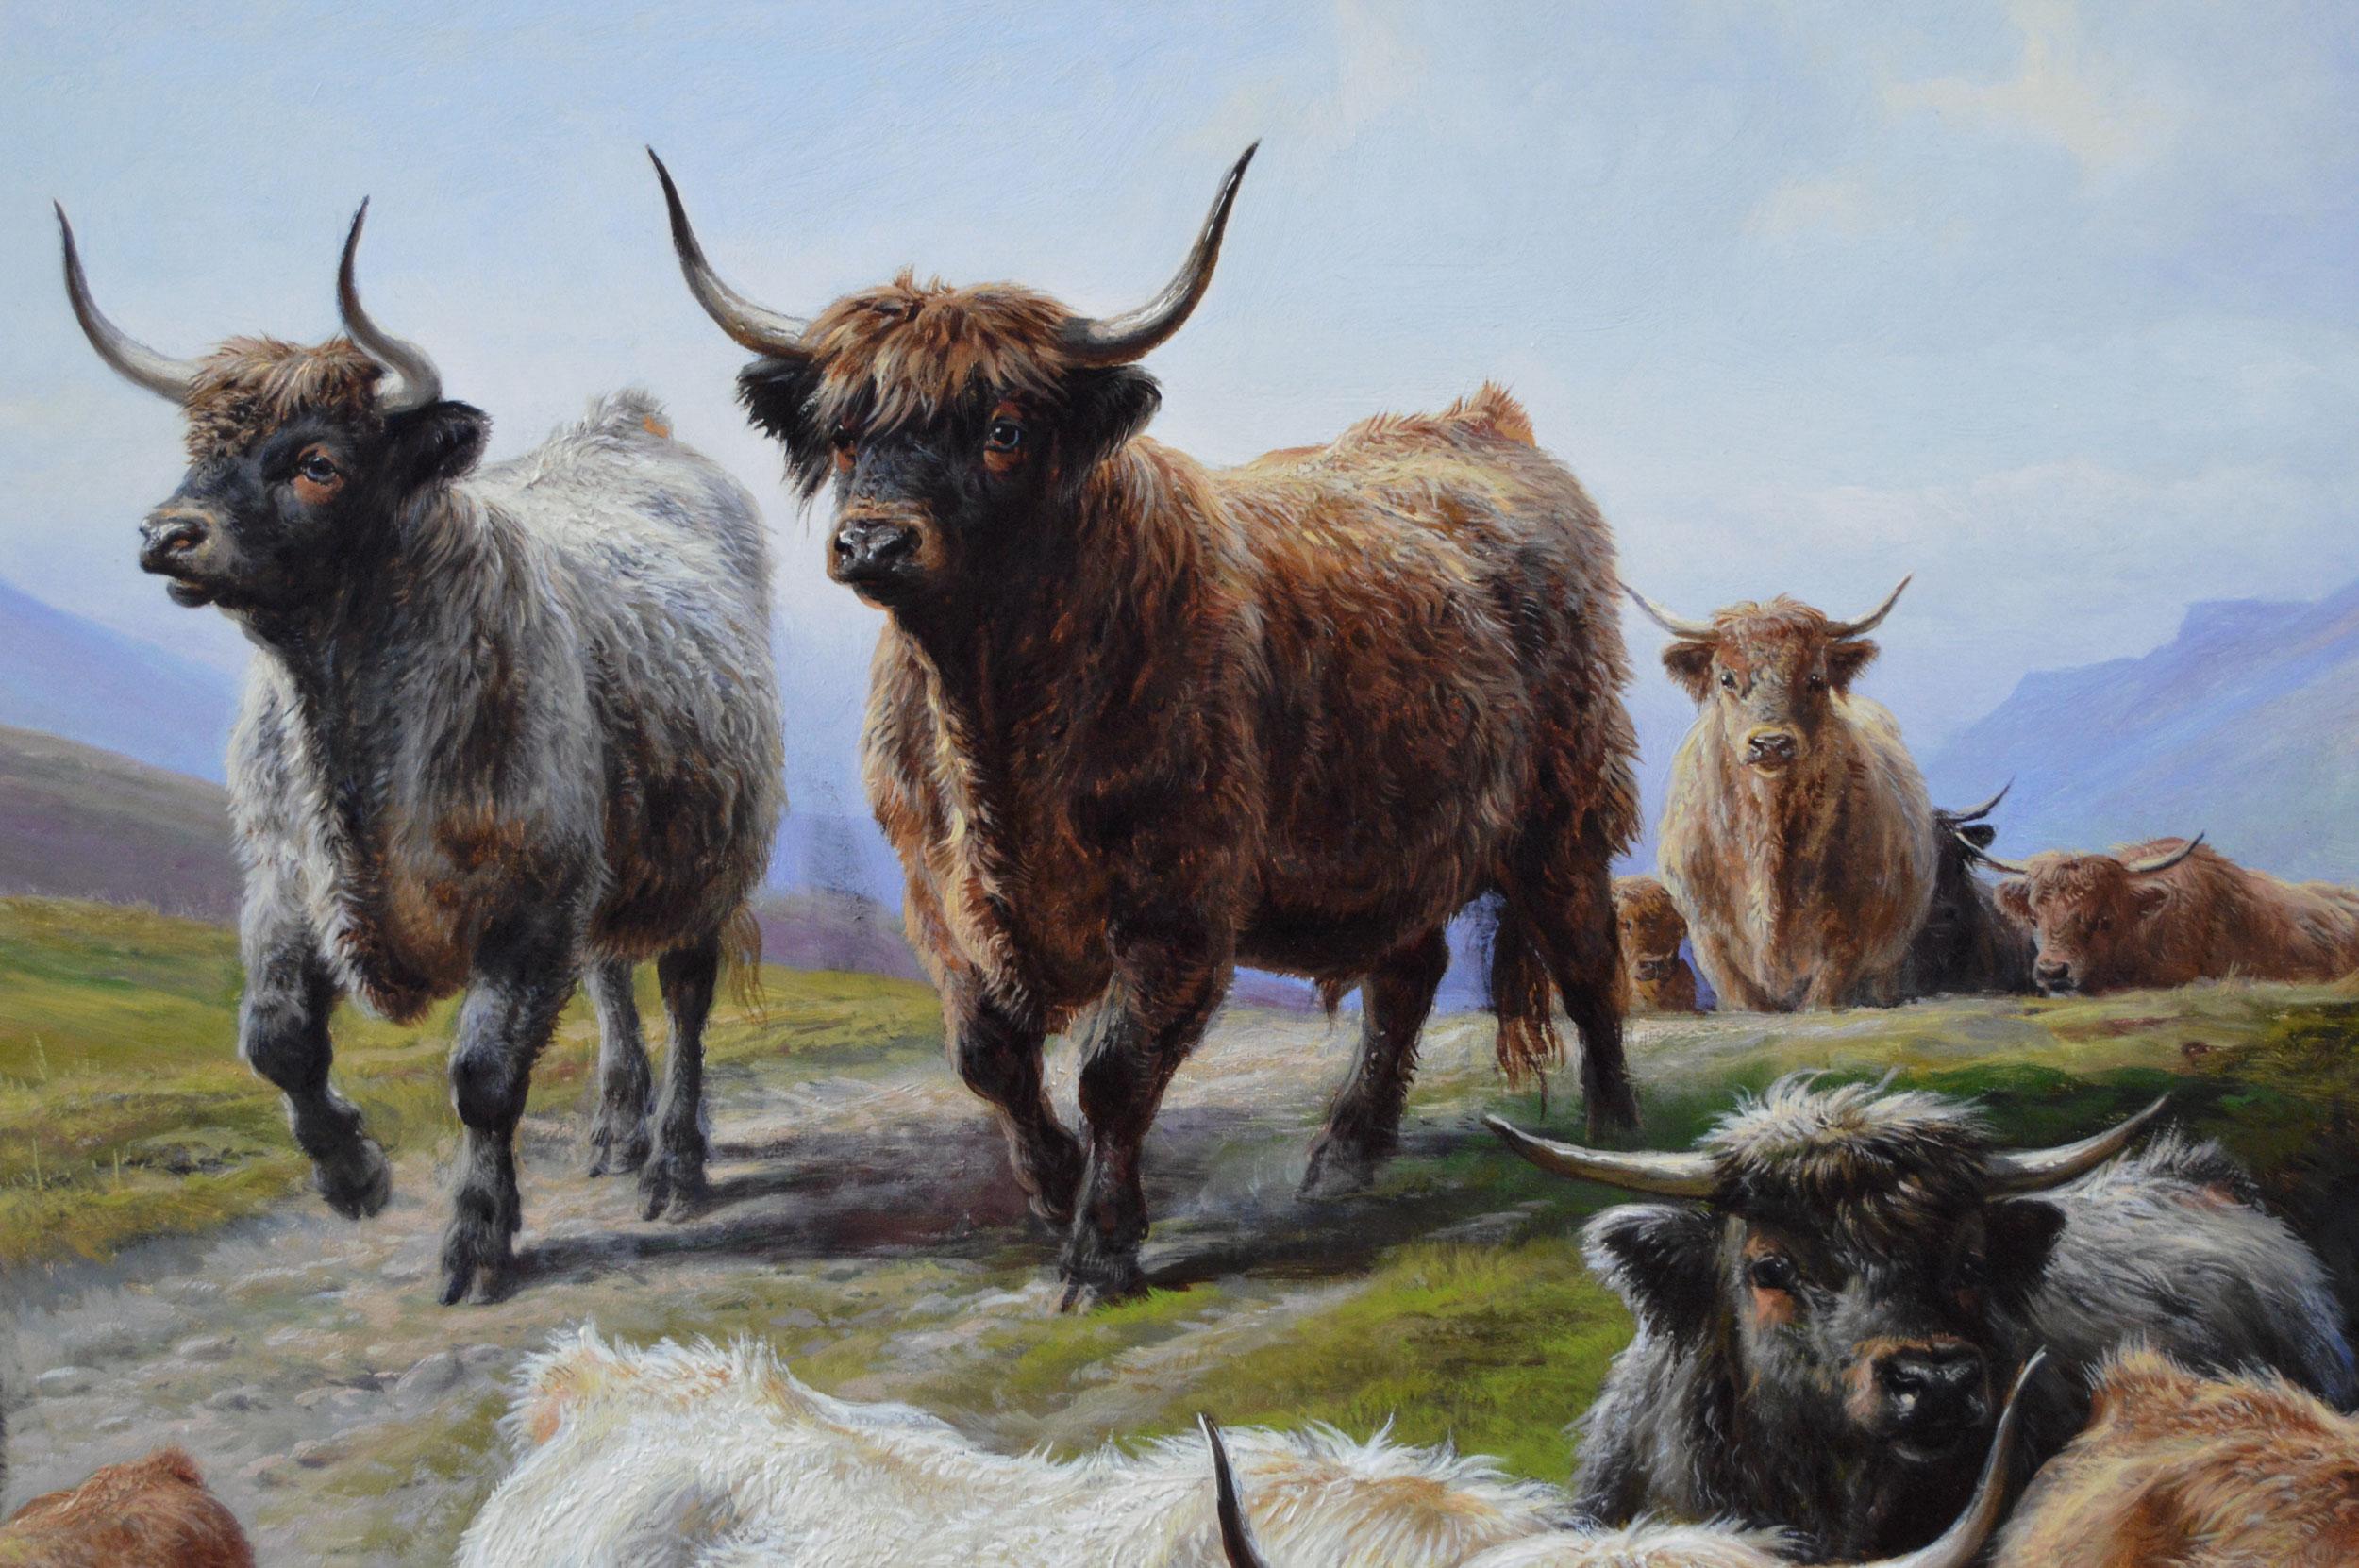 Charles Jones
British, (1836-1892)
Highland Cattle by Loch Linnhe
Oil on canvas, signed with monogram & dated (18)87, inscribed verso
Image size: 23.25 inches x 39.5 inches
Size including frame: 31.5 inches x 47.75 inches

A superb Scottish